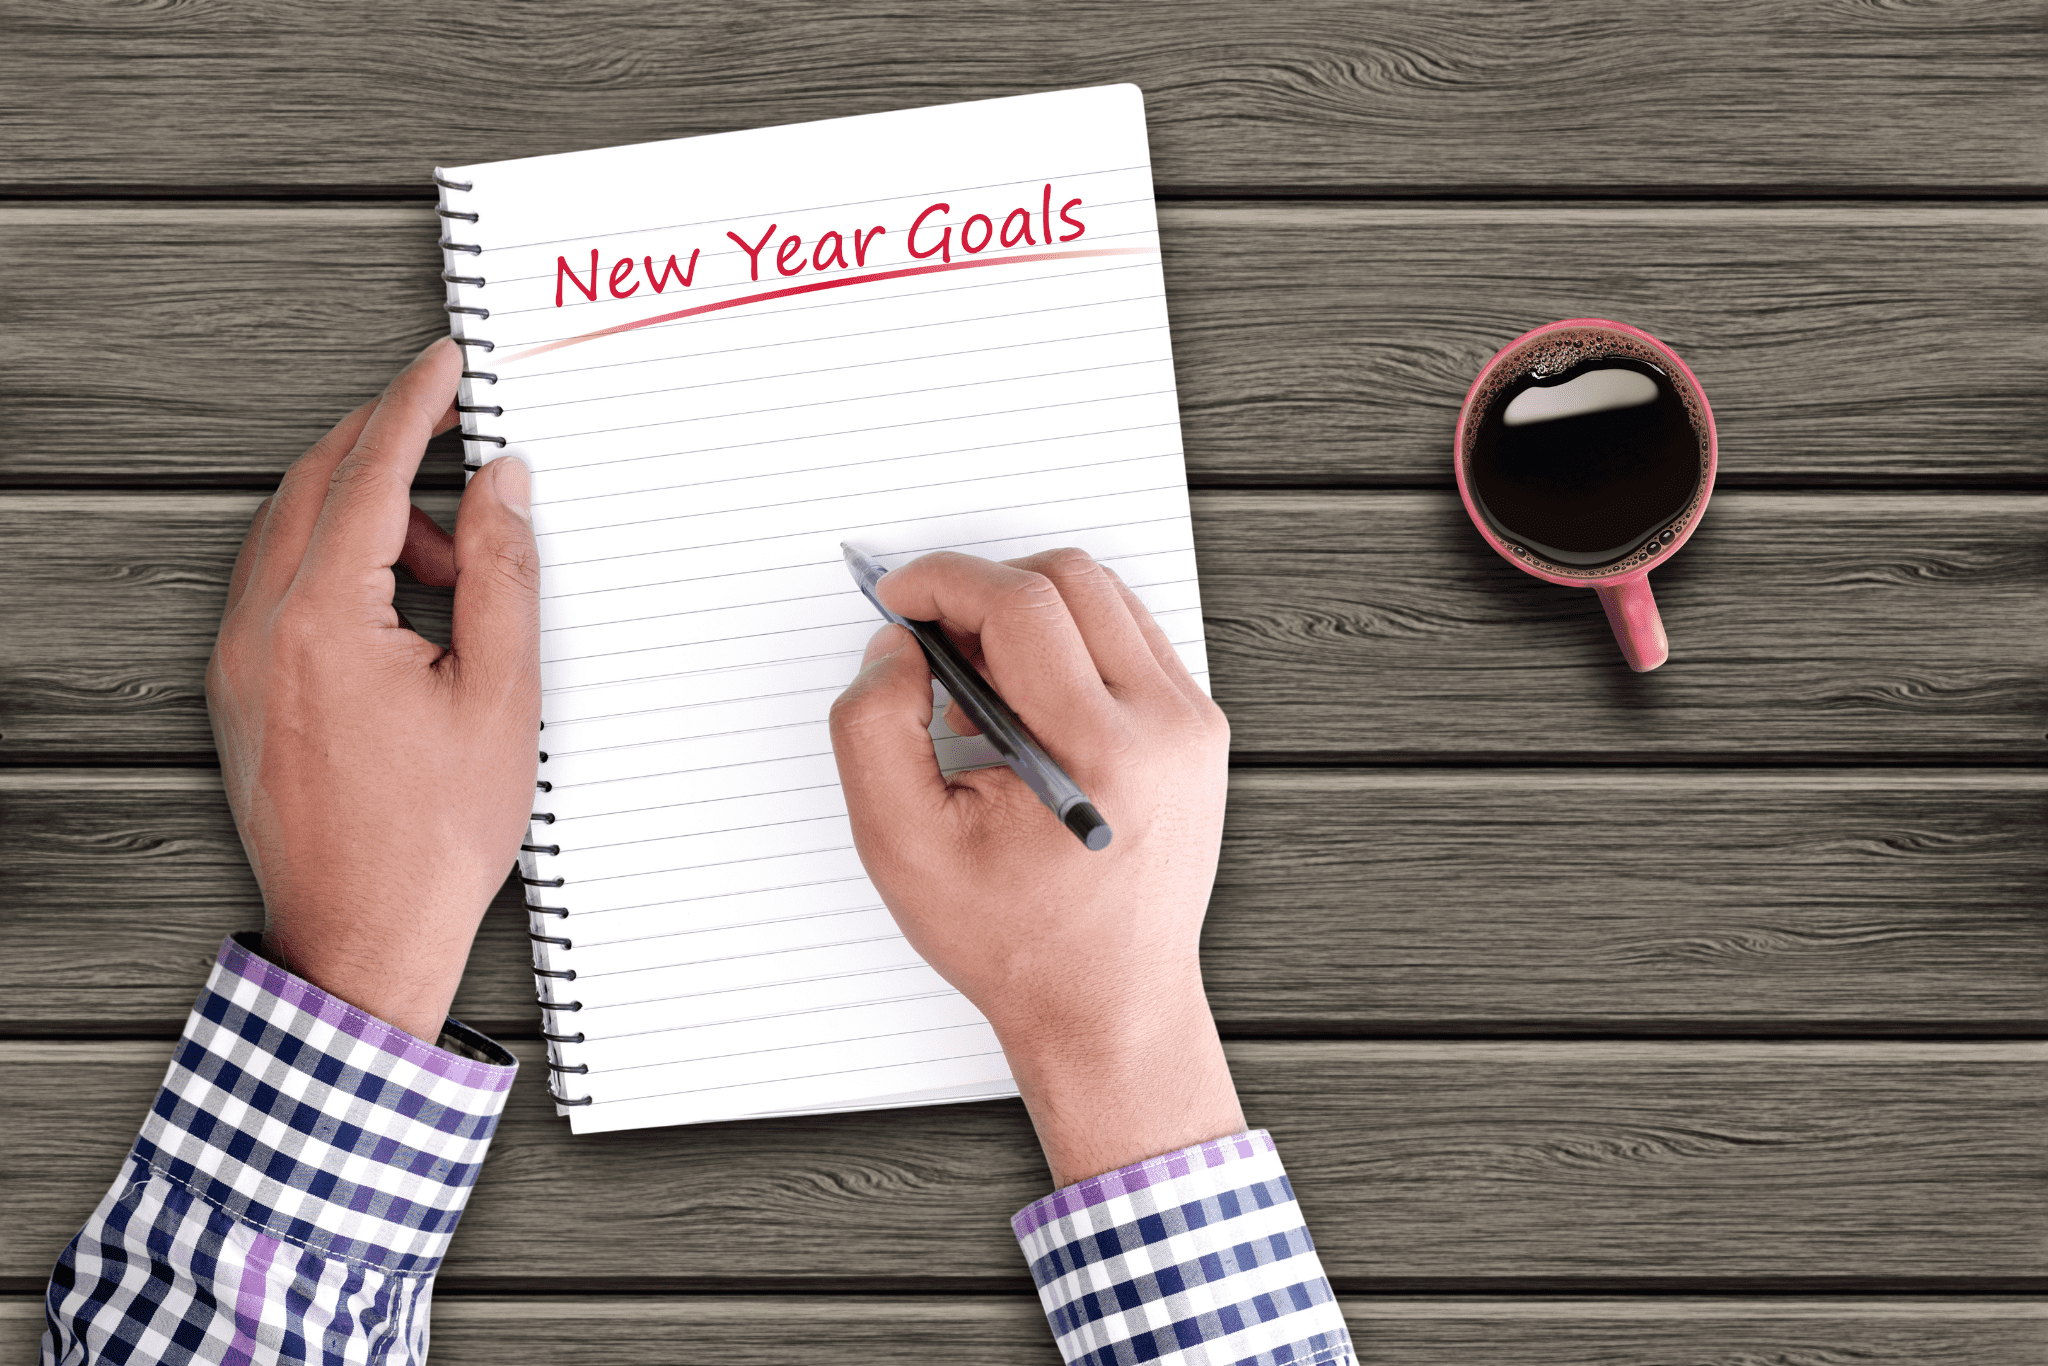 What’s Your New Year’s Resolution?